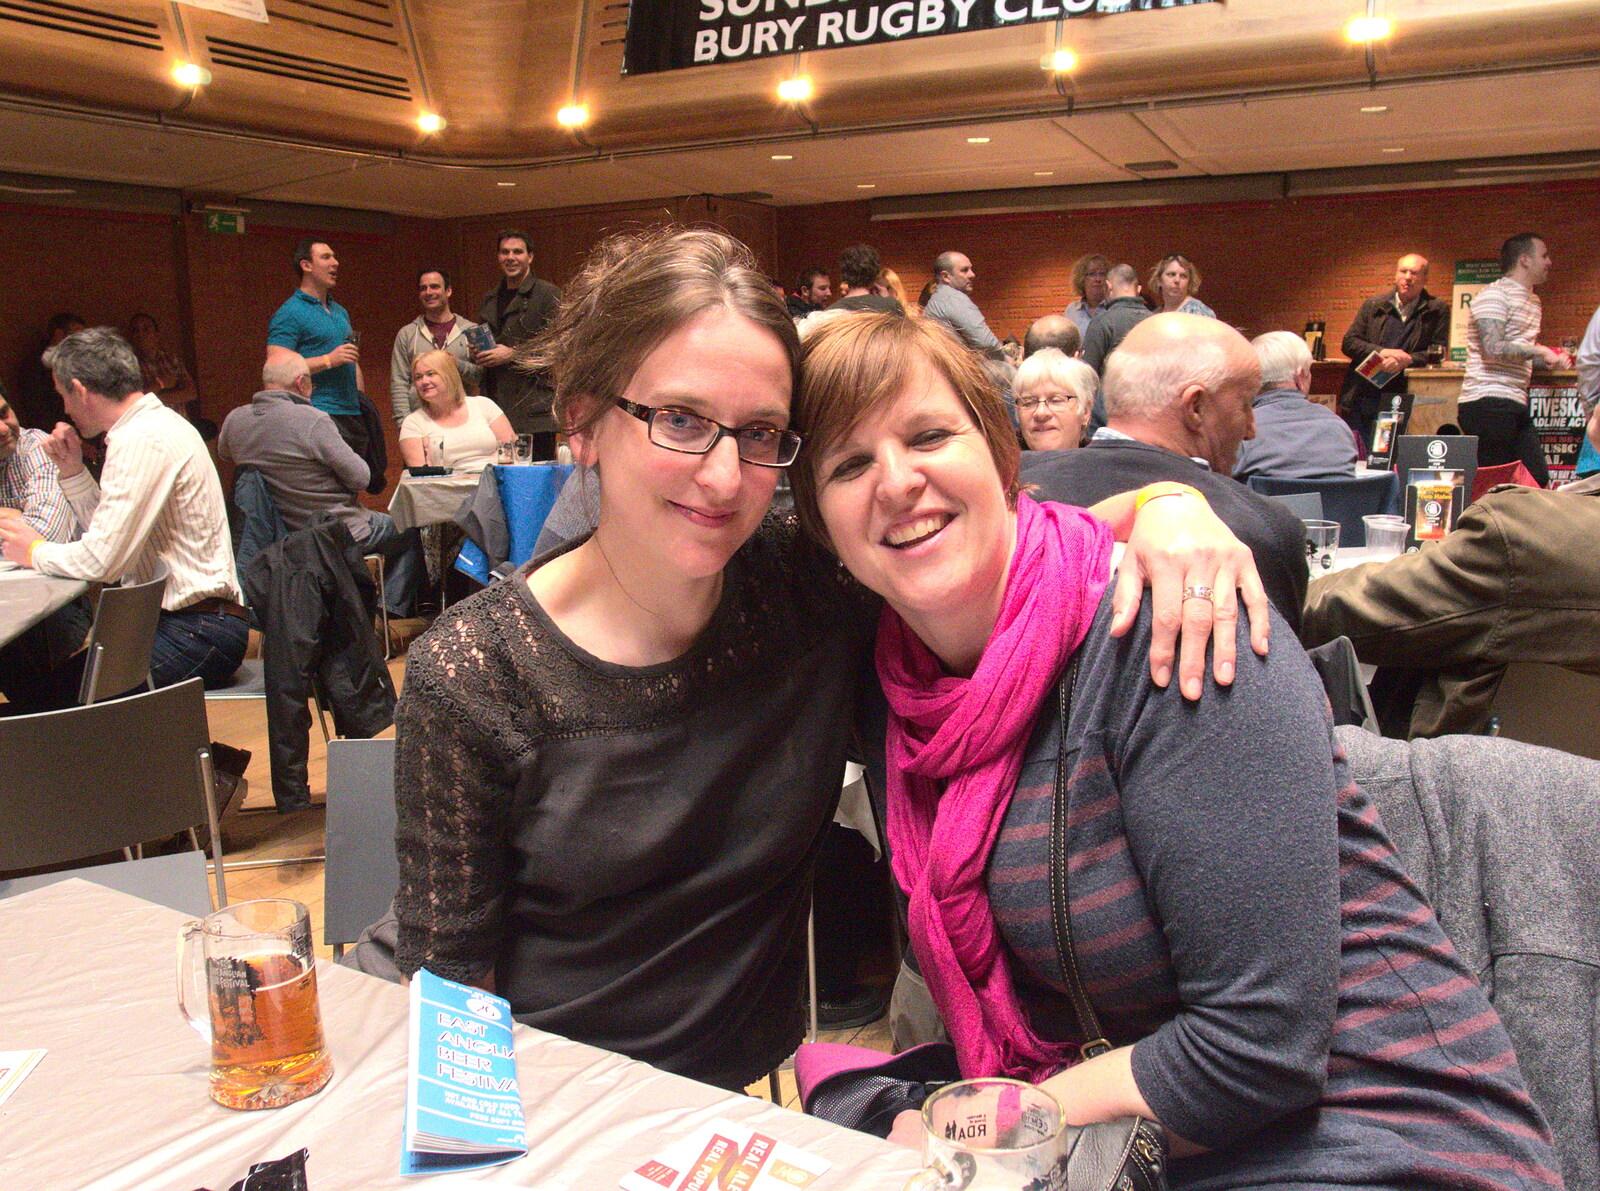 Suey and Sarah from The East Anglian Beer Festival, Bury St Edmunds, Suffolk - 23rd April 2016